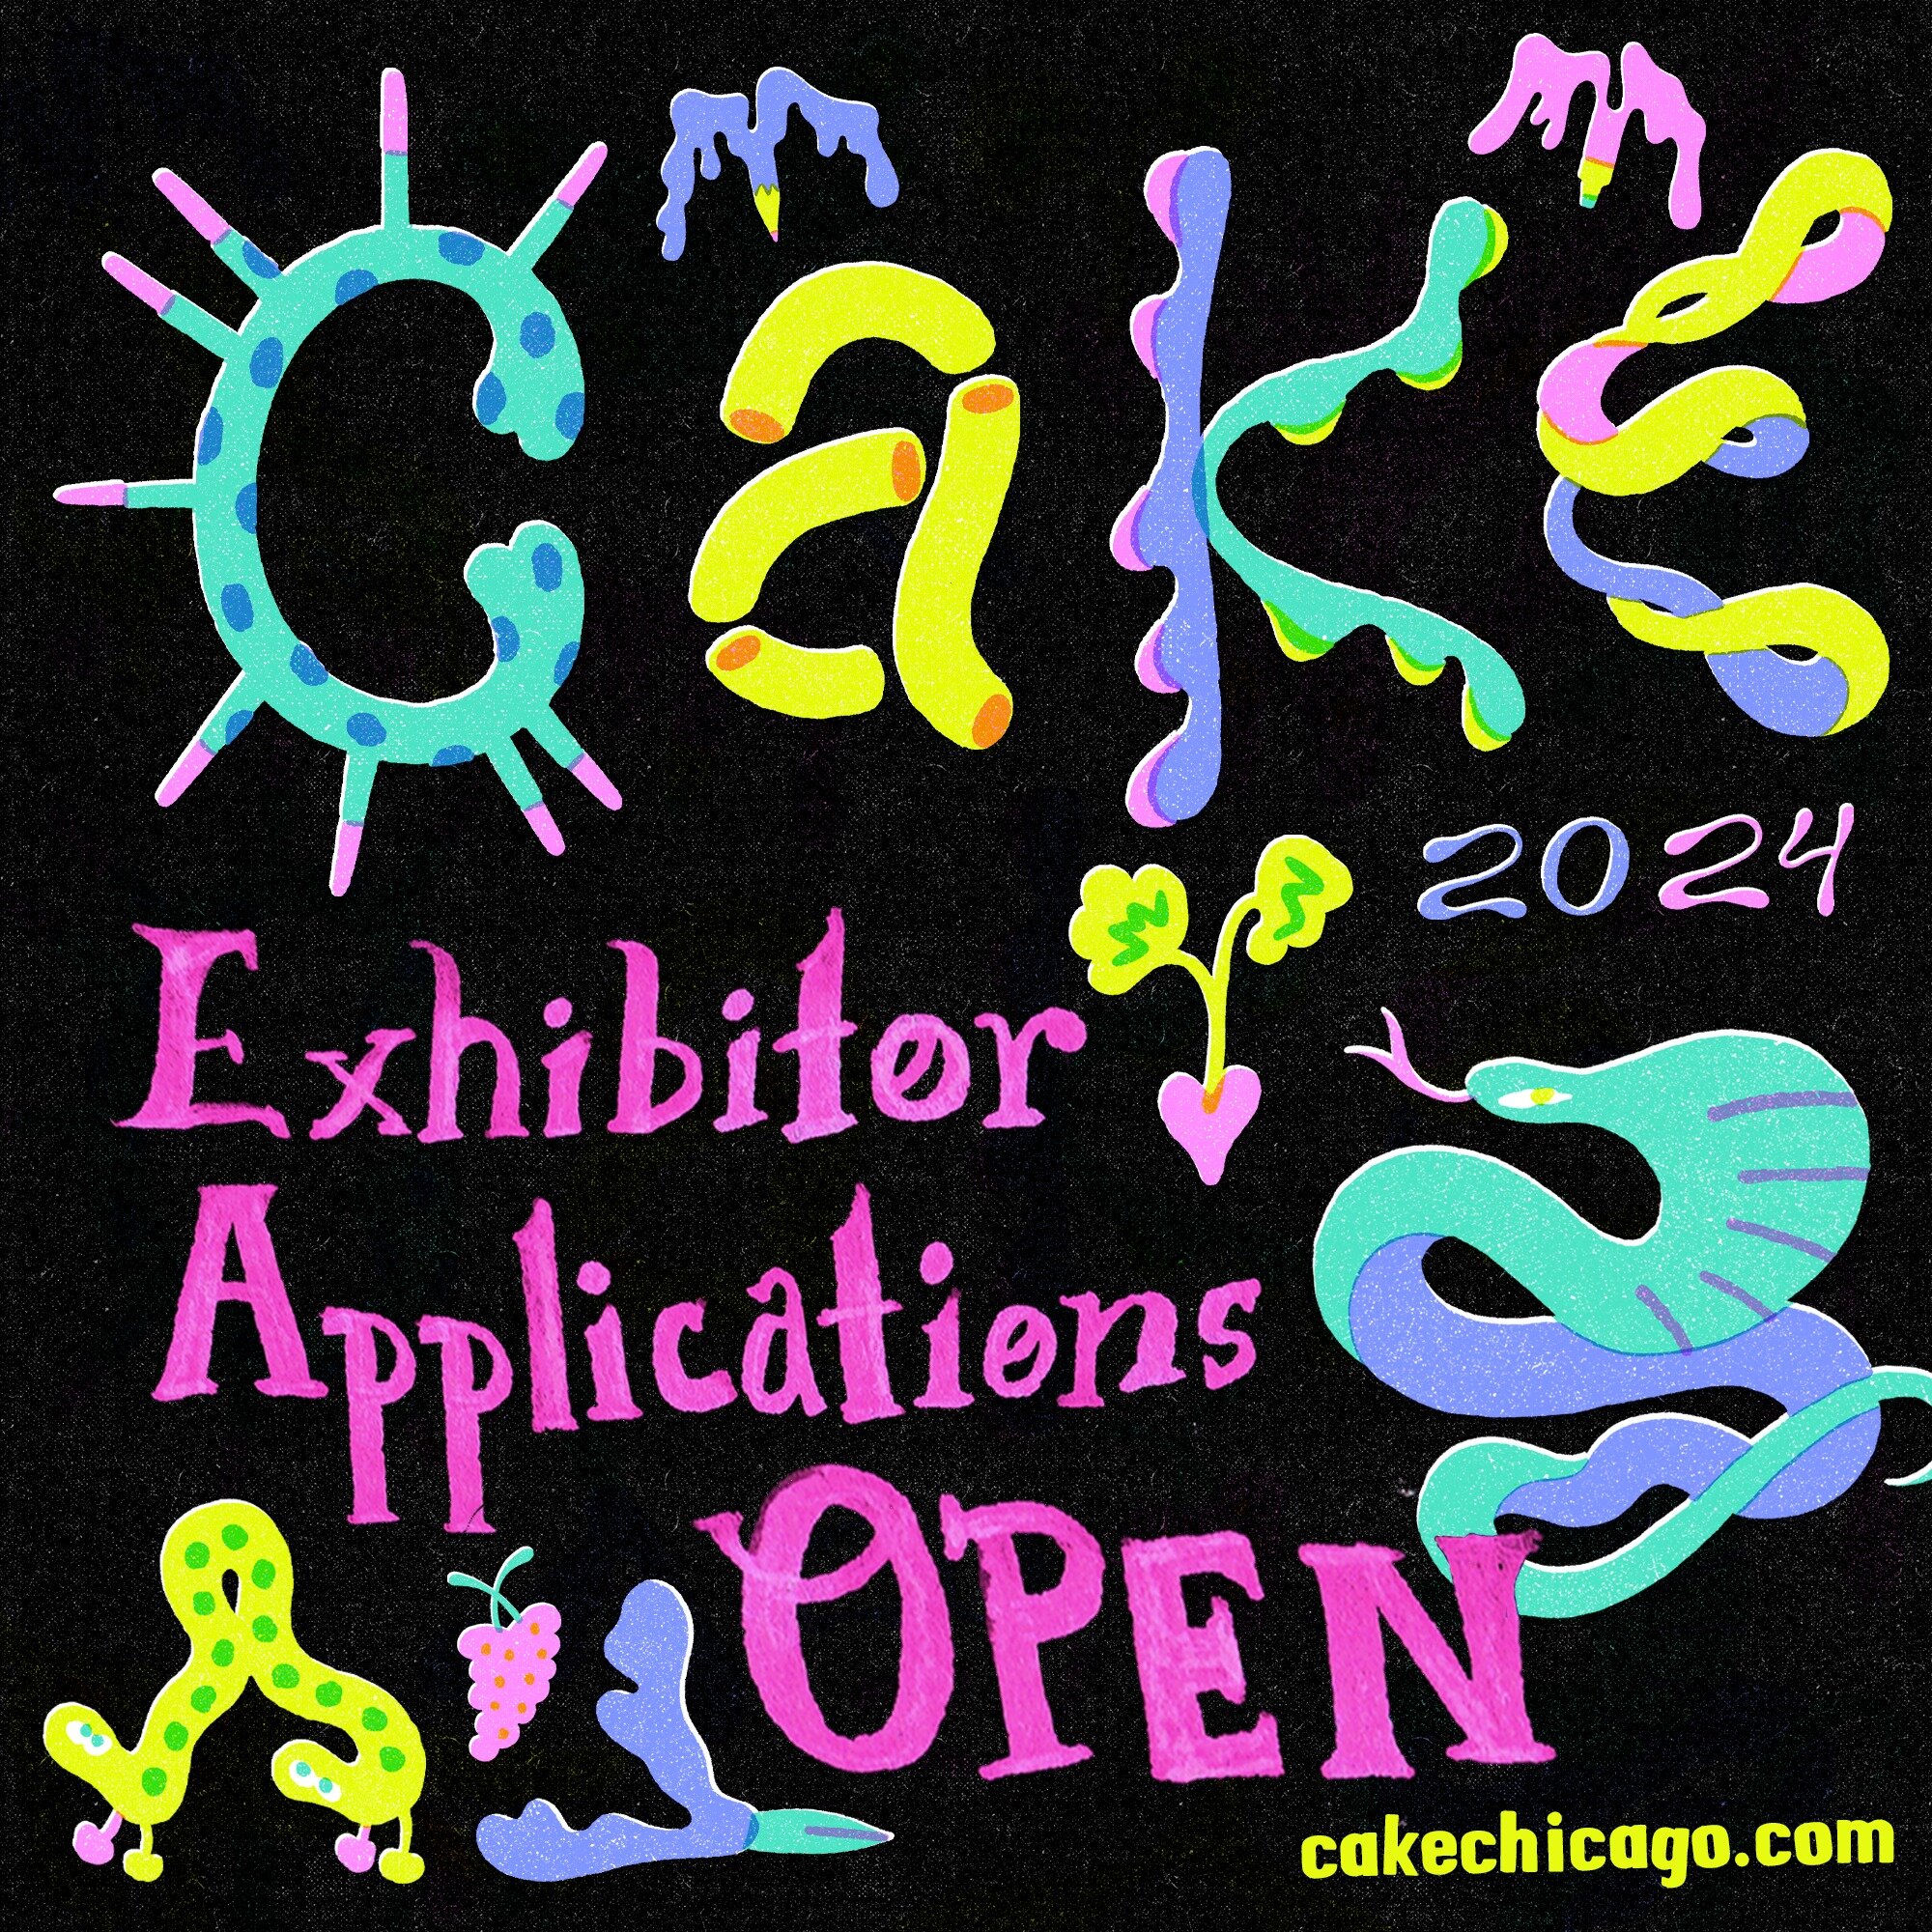 Chicago Alternative Comics Expo 2024 is officially open to Exhibitor Applications! Applications will remain open from March 18 to April 20, 2024. Application link on our website cakechicago.com!🍰

Please direct any questions to exhibitors@cakechicag